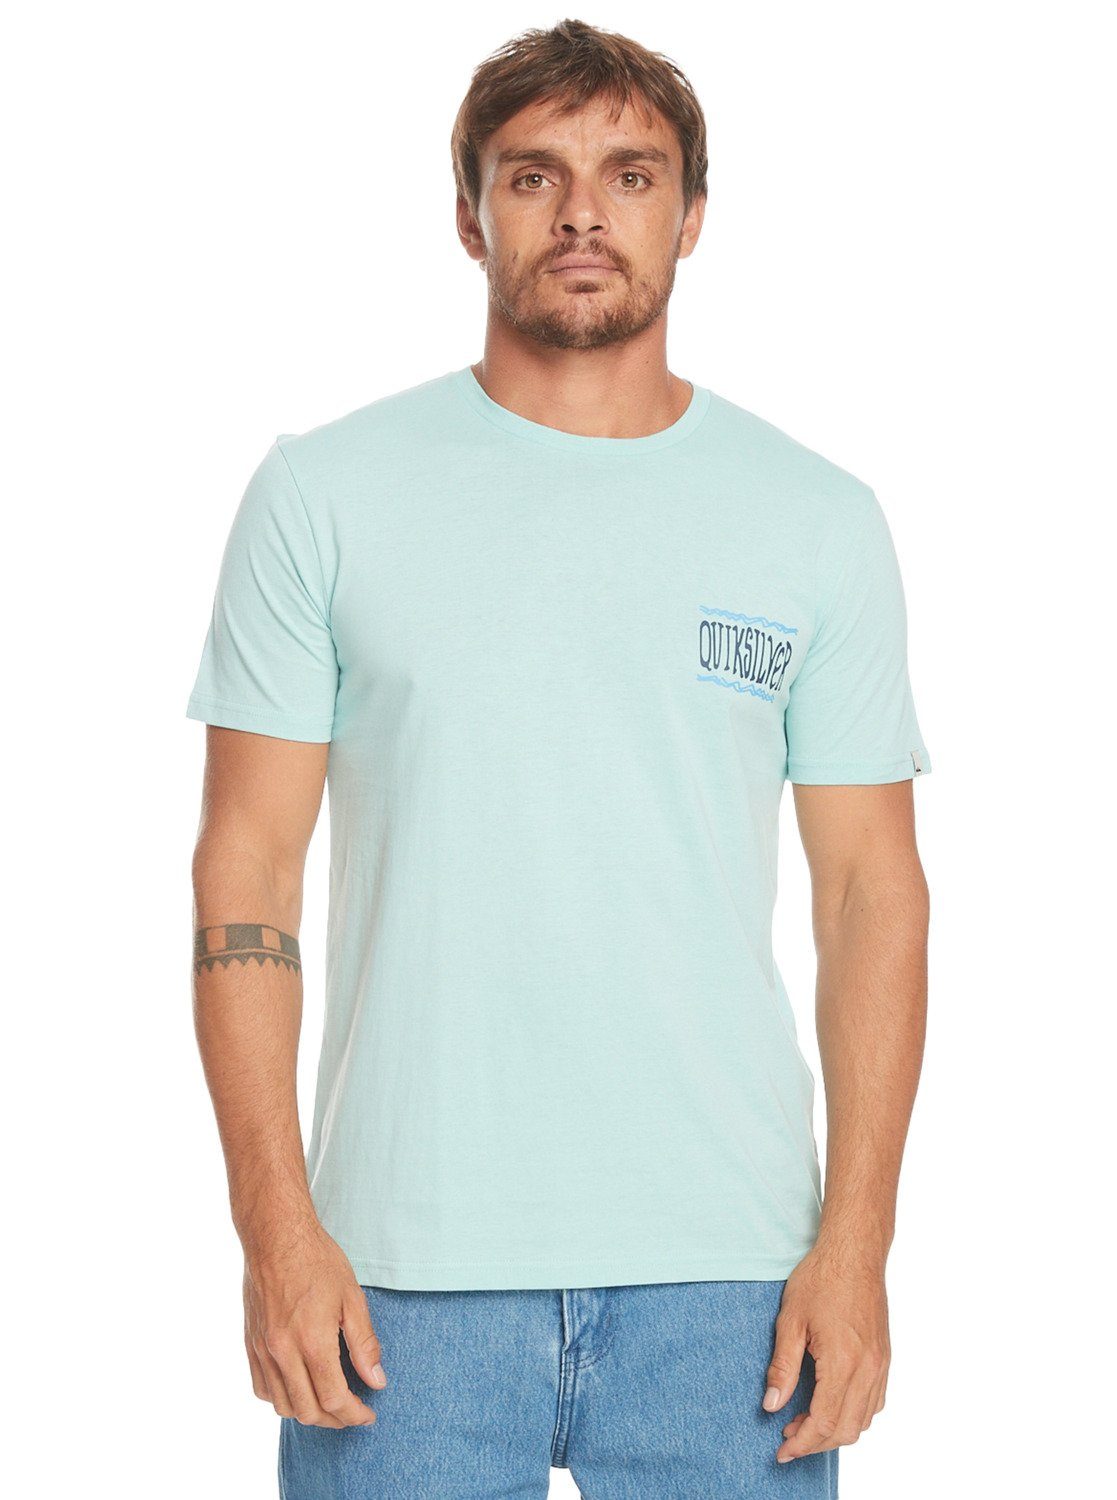 Quiksilver T-shirt Taking Roots